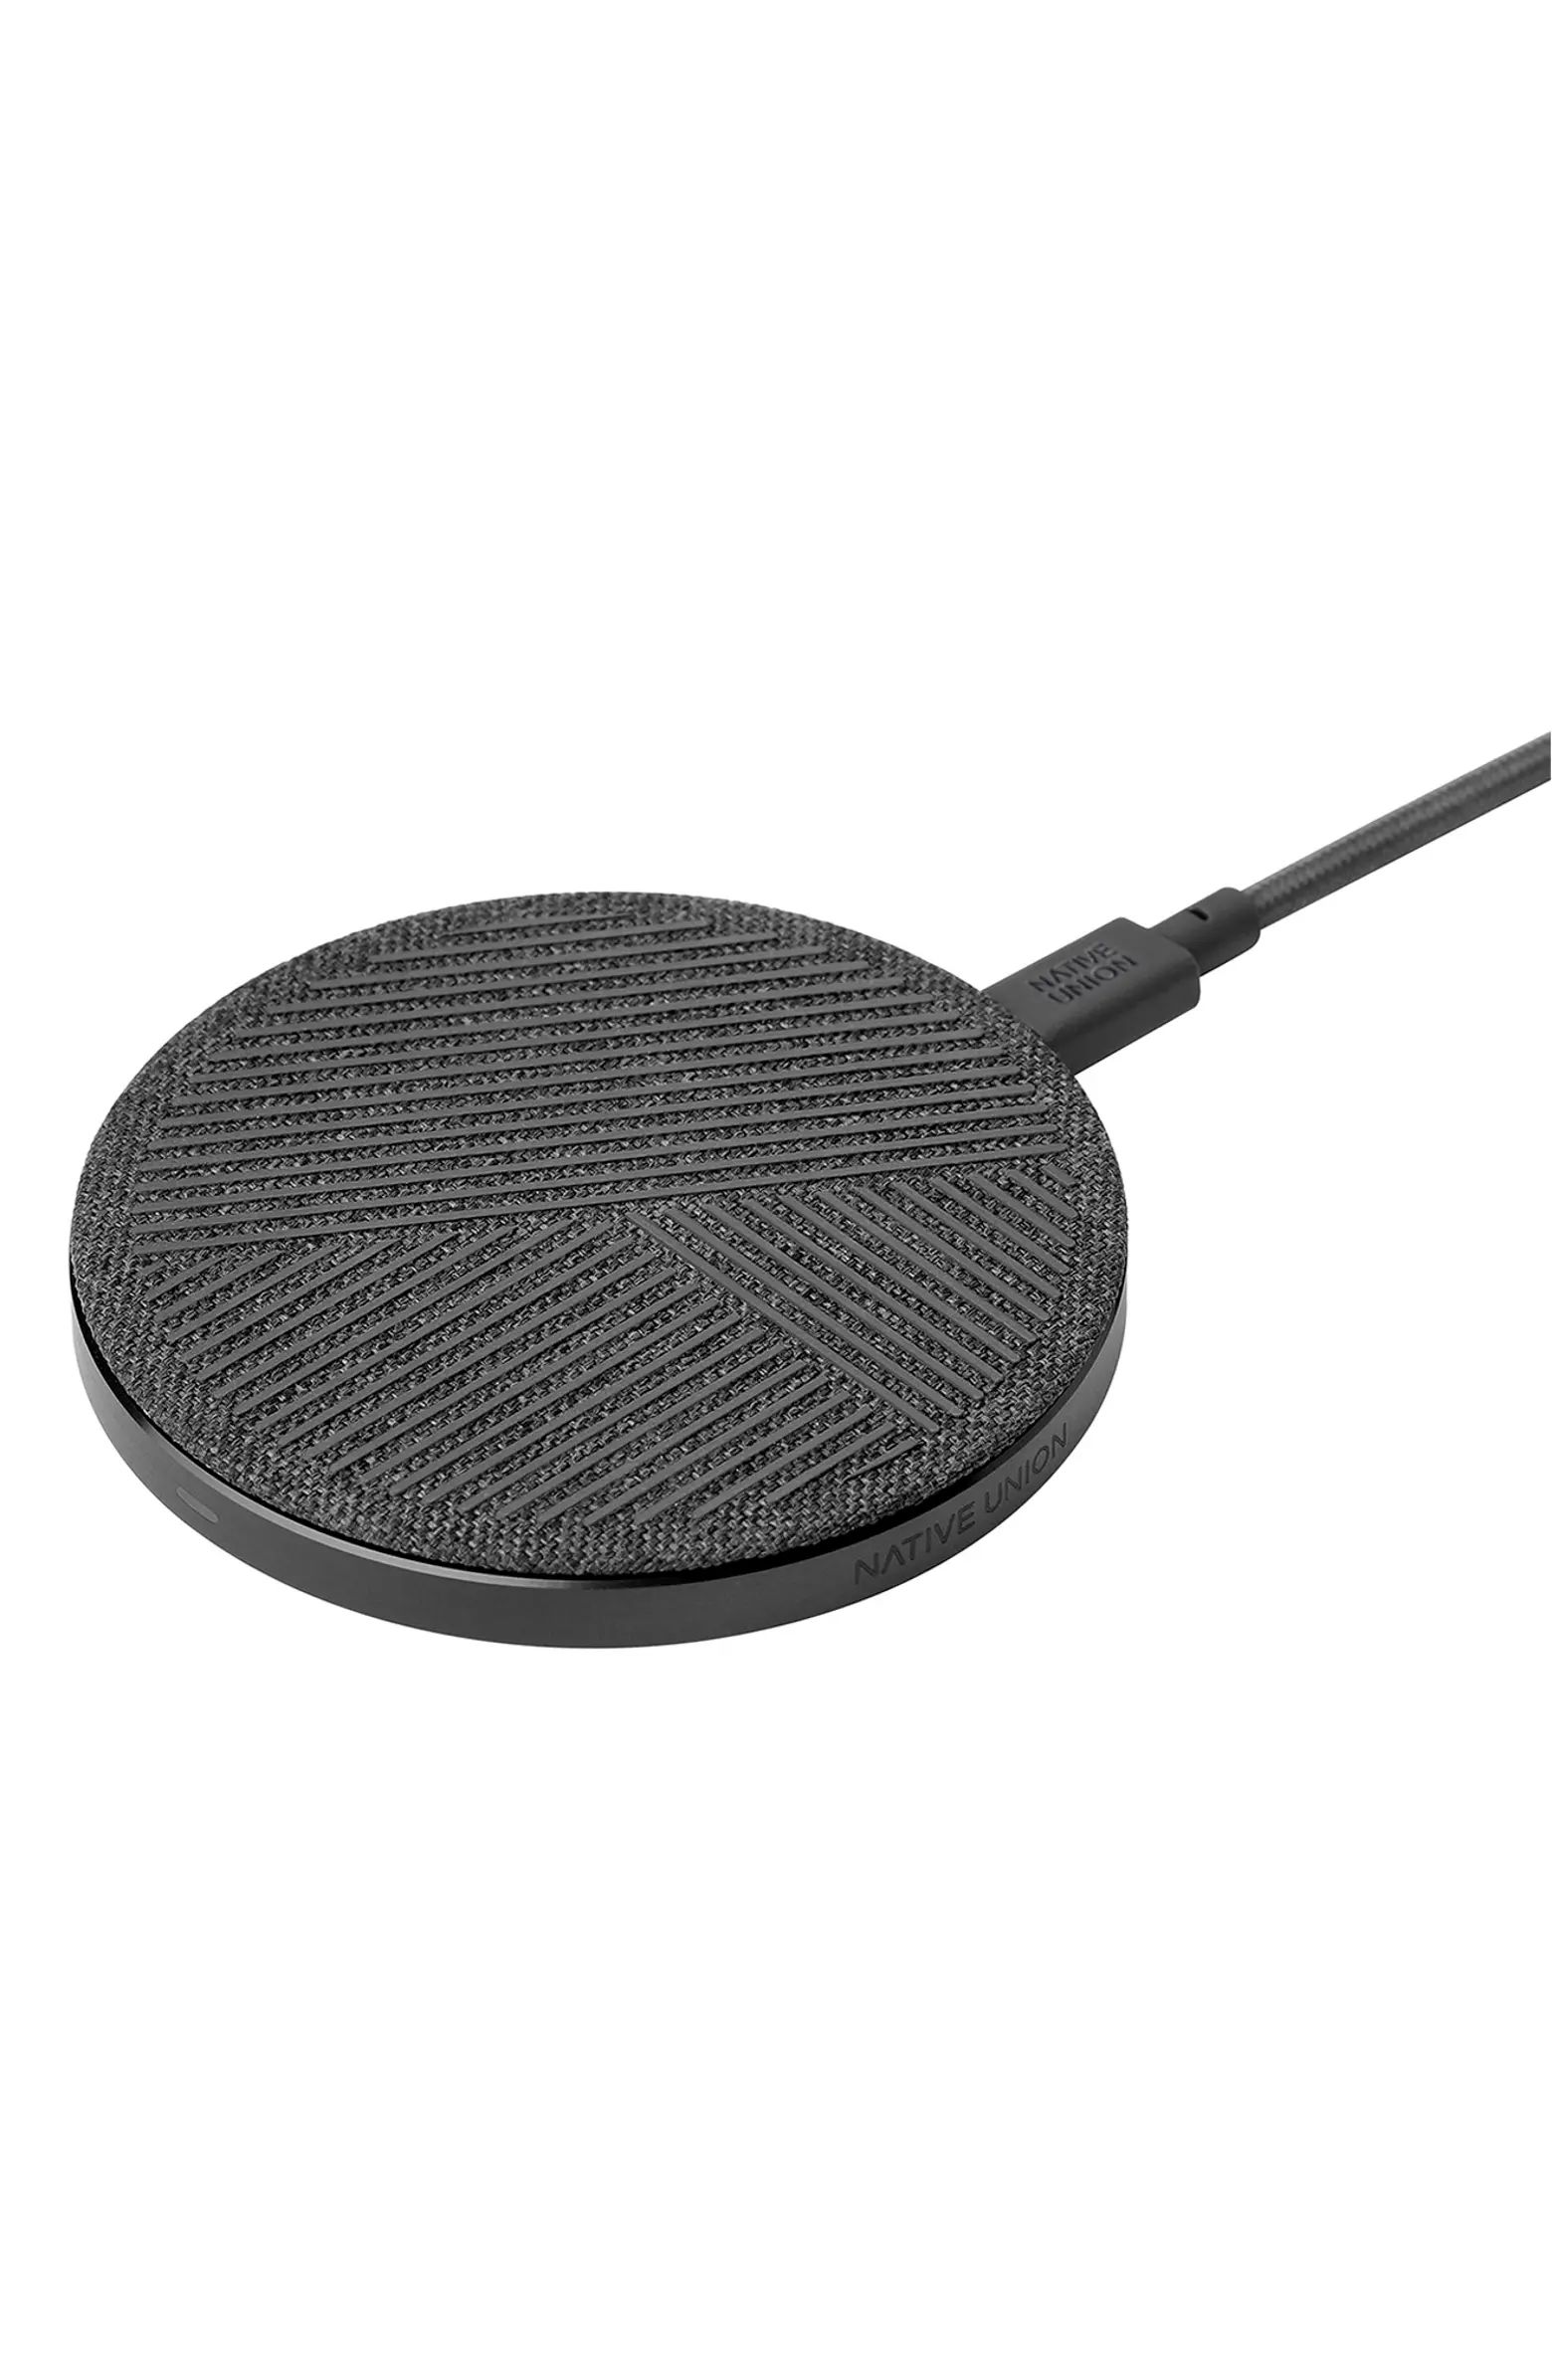 Native Union Drop Wireless Charging Pad | Nordstrom | Nordstrom